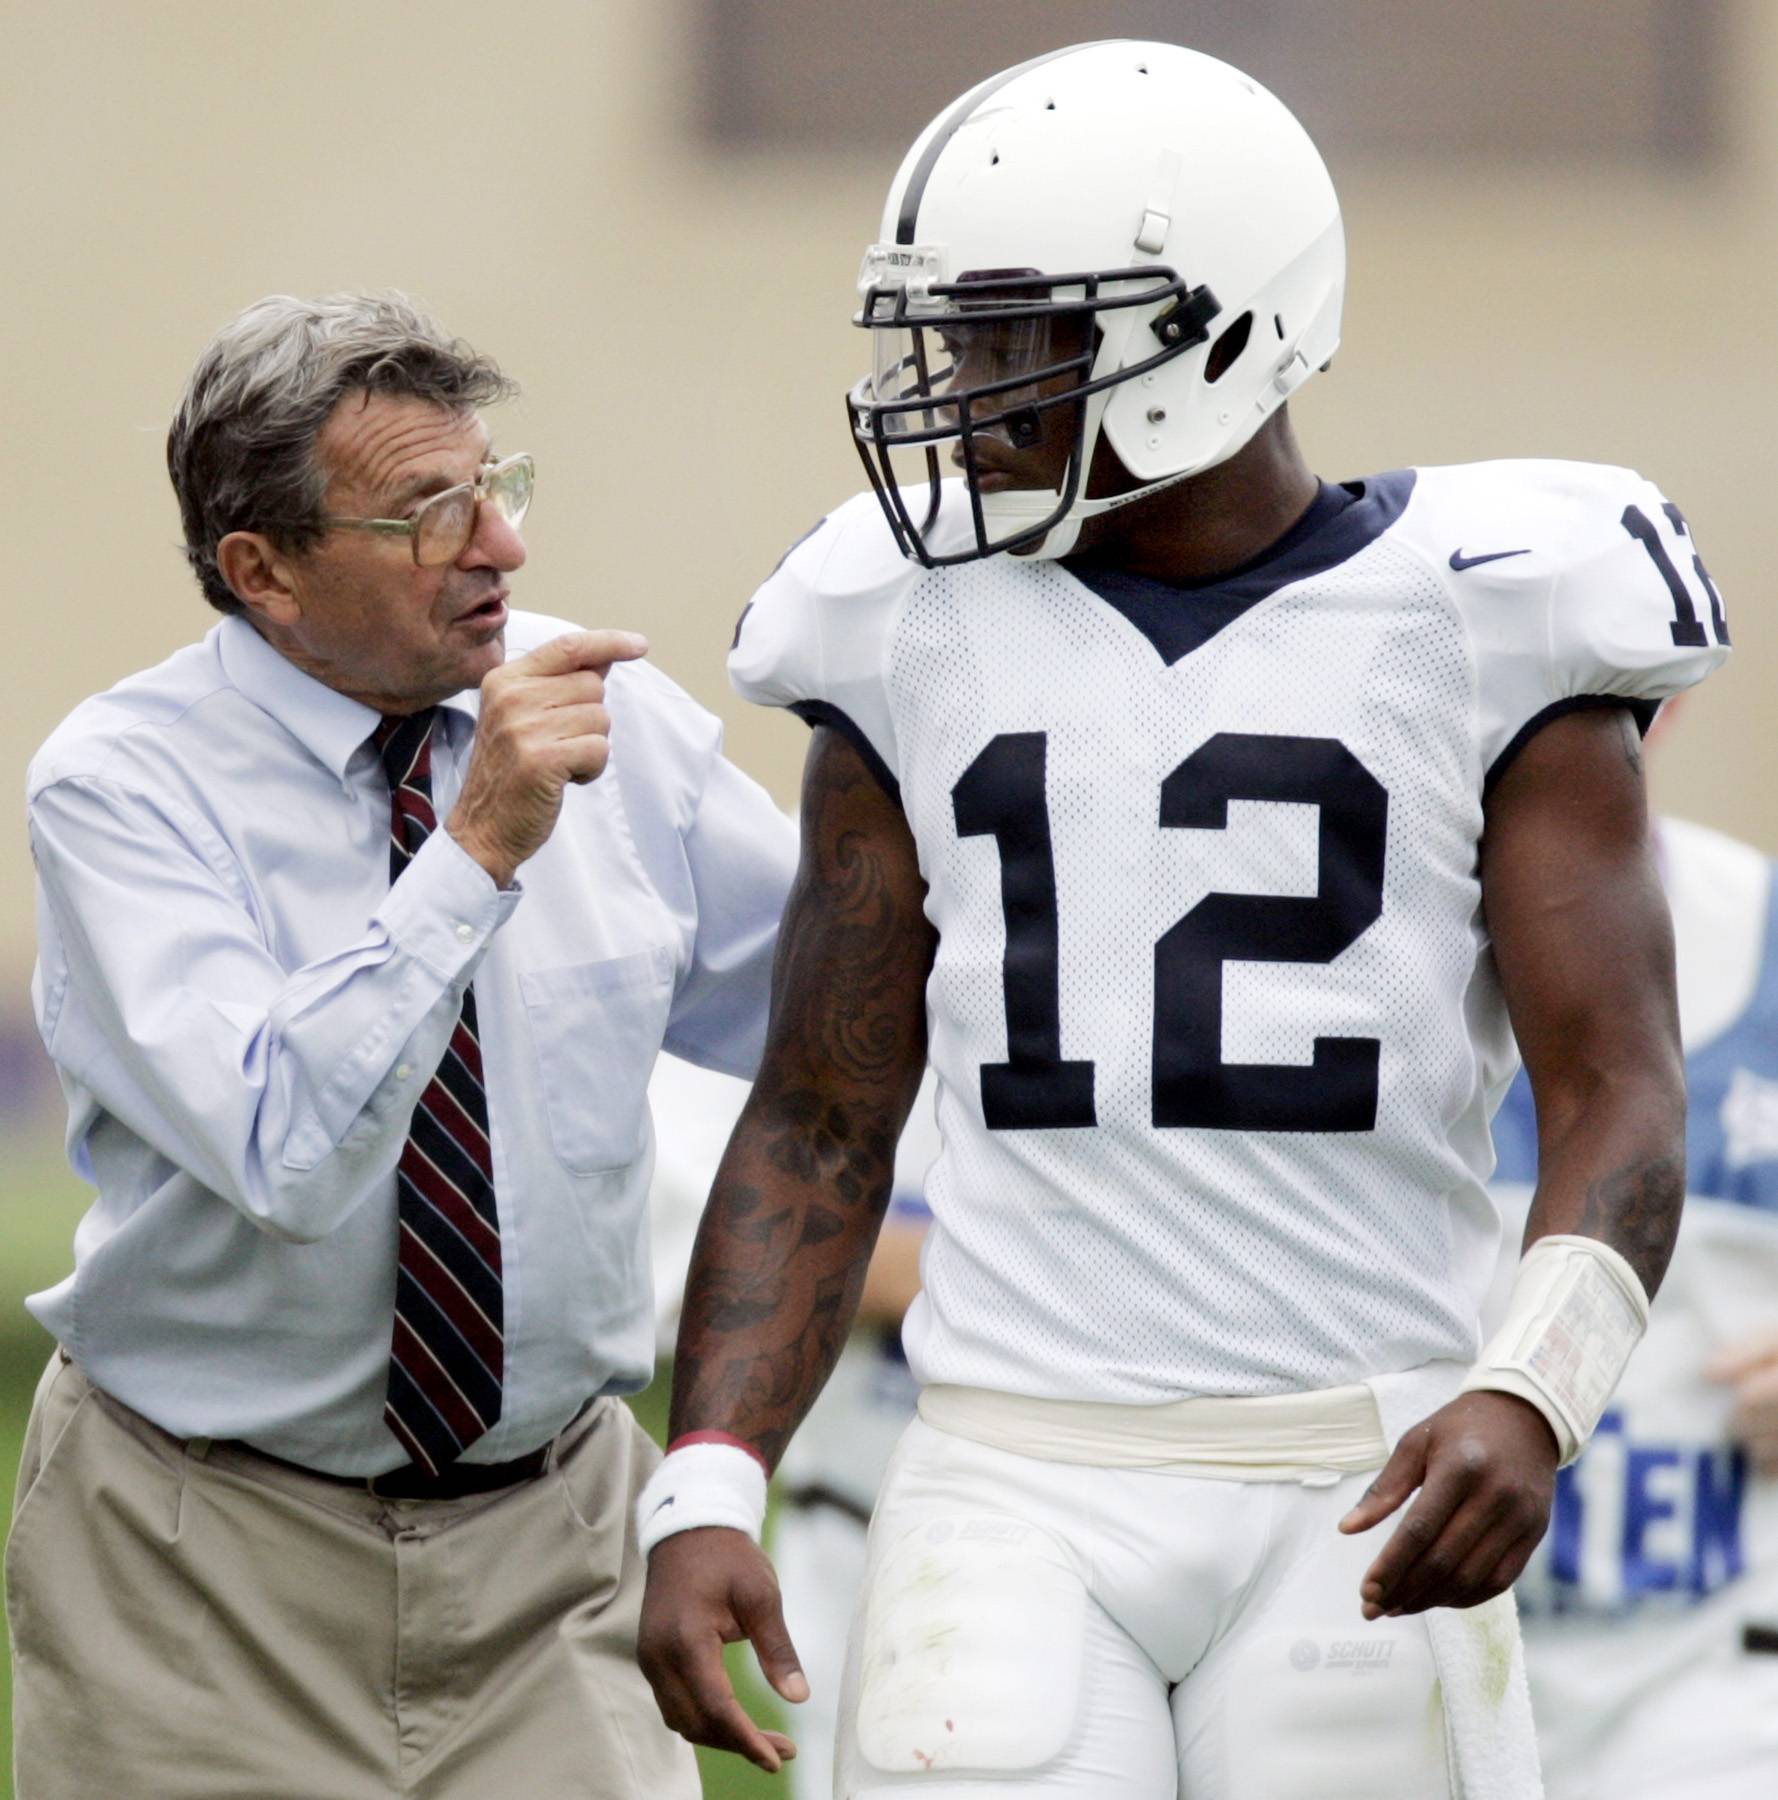 Penn State Coach Is Fired - Celebrated Penn State University head football coach Joe Paterno was dismissed by the school's board of trustees in light of shocking child molestation charges against one of his former assistant coaches, Jerry Sandusky. Paterno said he wished he had done more after being told of the alleged abuse, including a charge that Sandusky had sex in a football locker room shower with an underage boy in 2002. Paterno had been at the school for 61 years, serving as head coach since 1966.&nbsp;(Photo: Gregory Shamus/Getty Images)